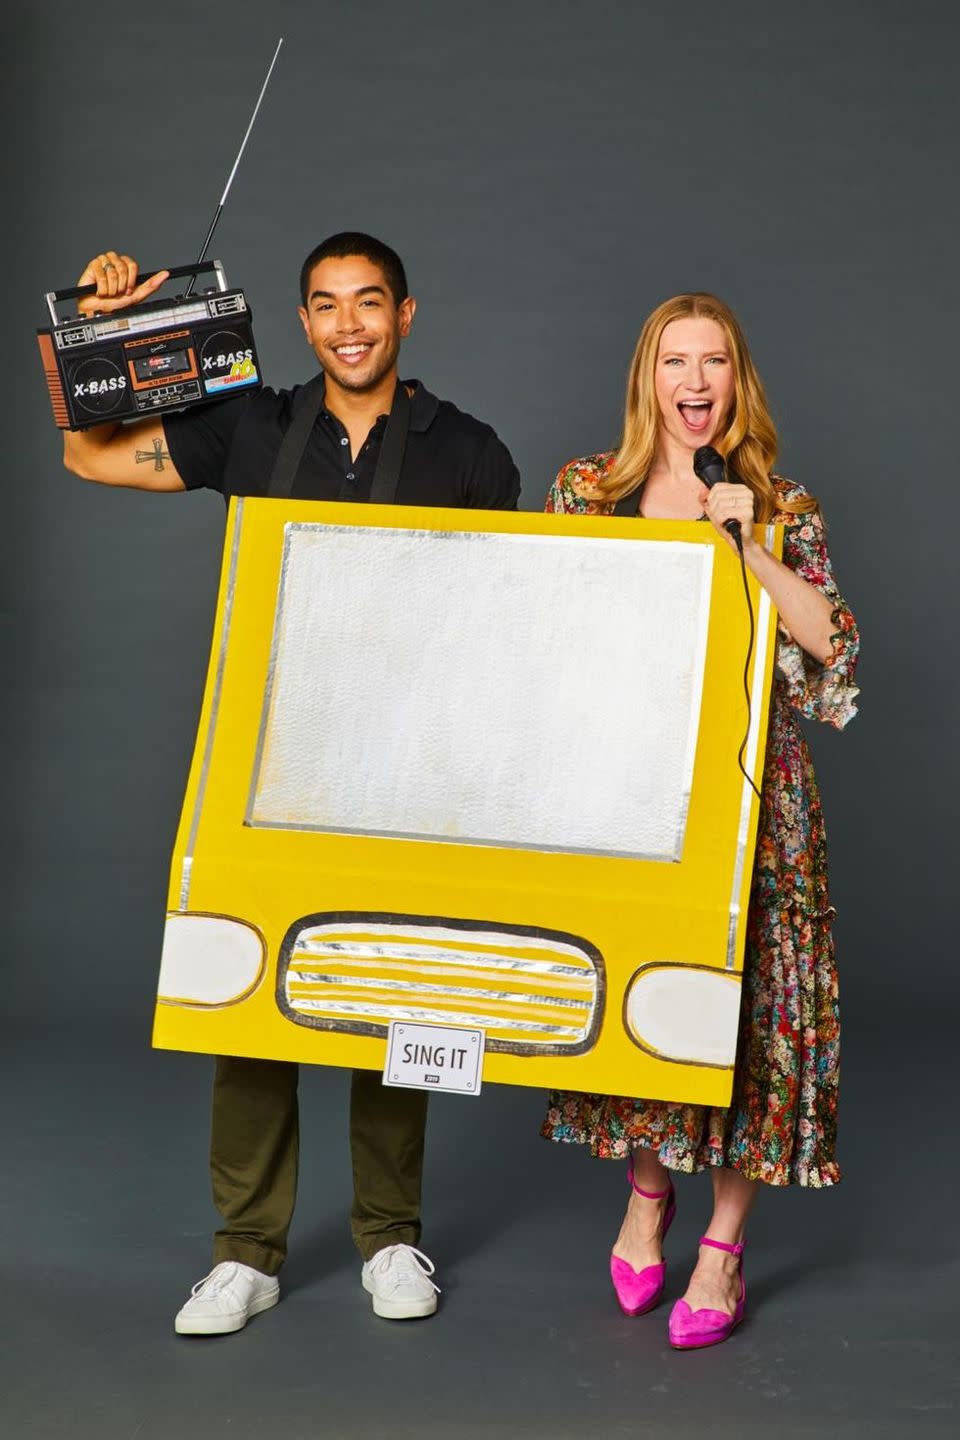 <p>If anyone's ever questioned your karaoke skills, let this clever costume showcase just how talented you two are. Add silver and black paint to a yellow presentation board to resemble a taxi, then attach velcro straps. Loop the straps over your shoulders, grab your mics and work your way through your playlist.</p>